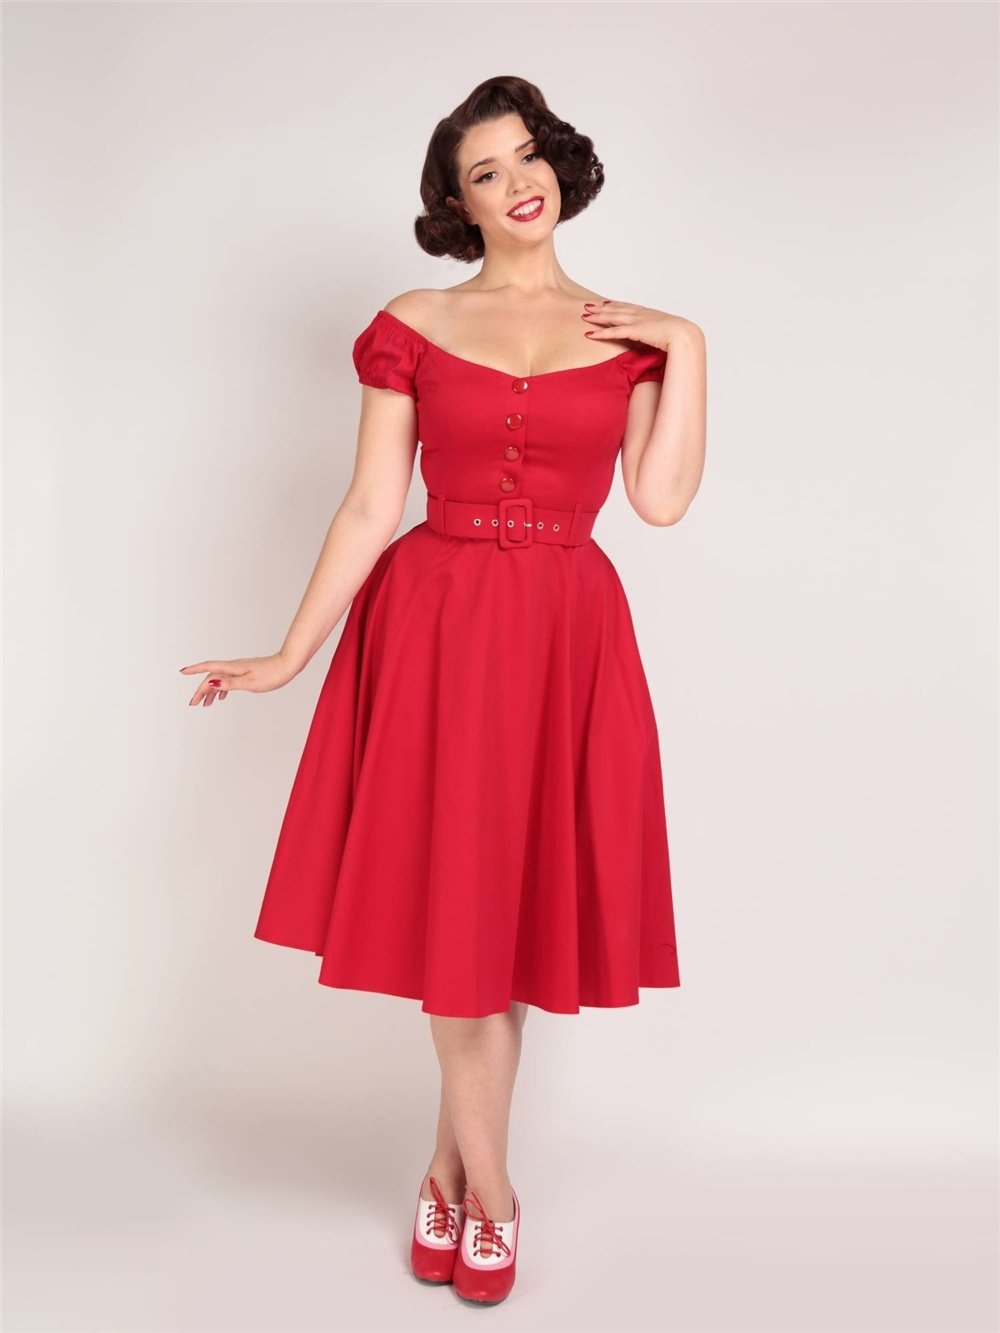 Blanche Swing Dress In Red Collectif Pinup Retro Vintage - Kitsch